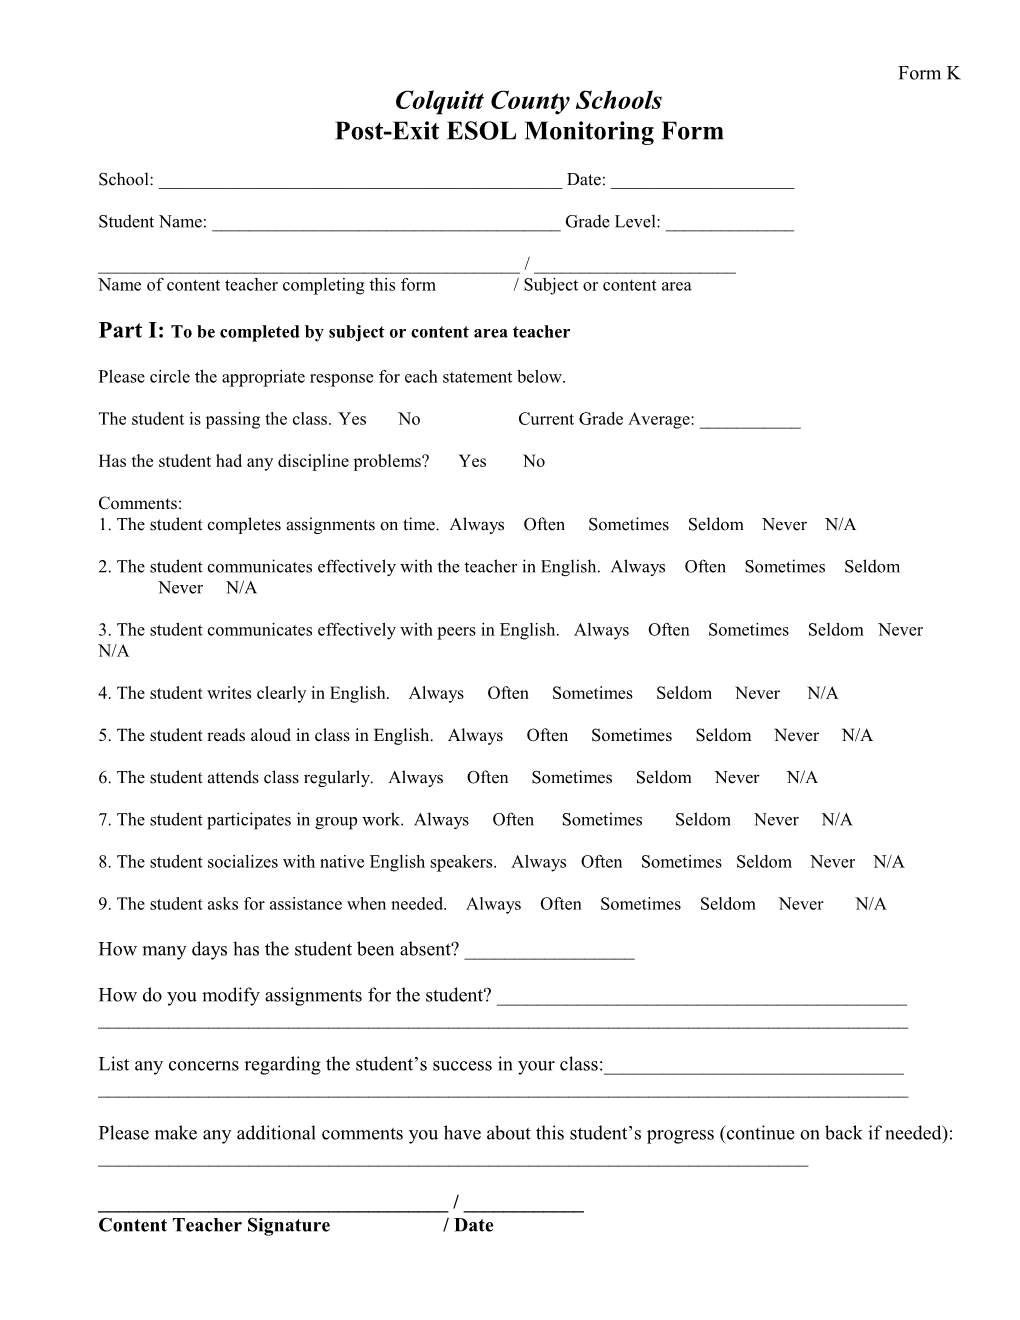 Sample MS & HS Monitoring Form for Exited ESOL Students